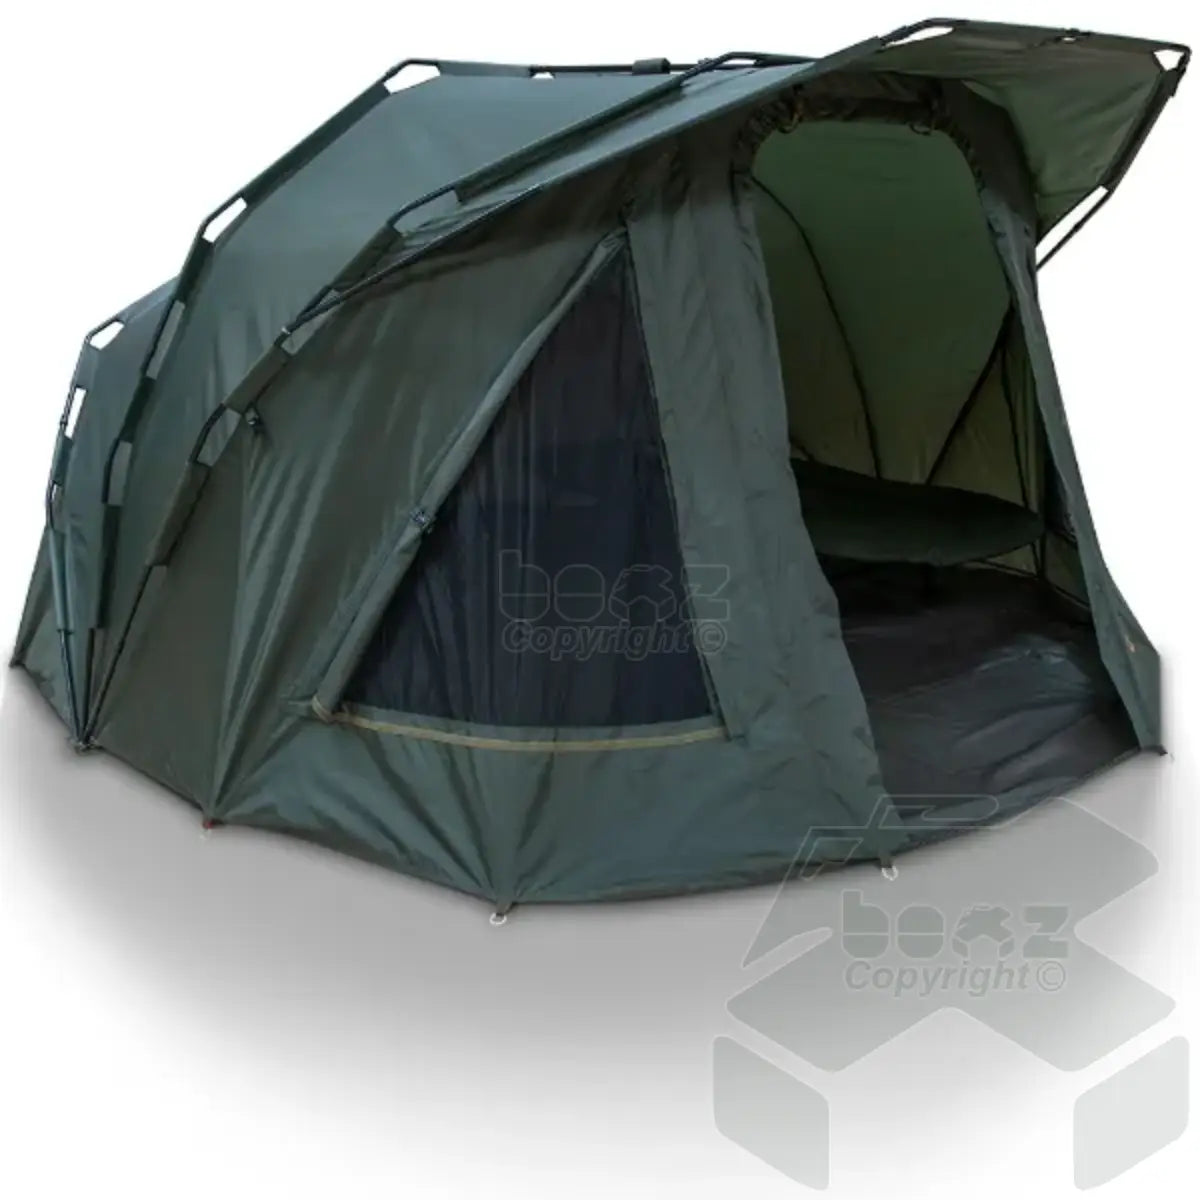 NGT XL Fortress with Hood - 5000mm Super Sized 2 Man Bivvy